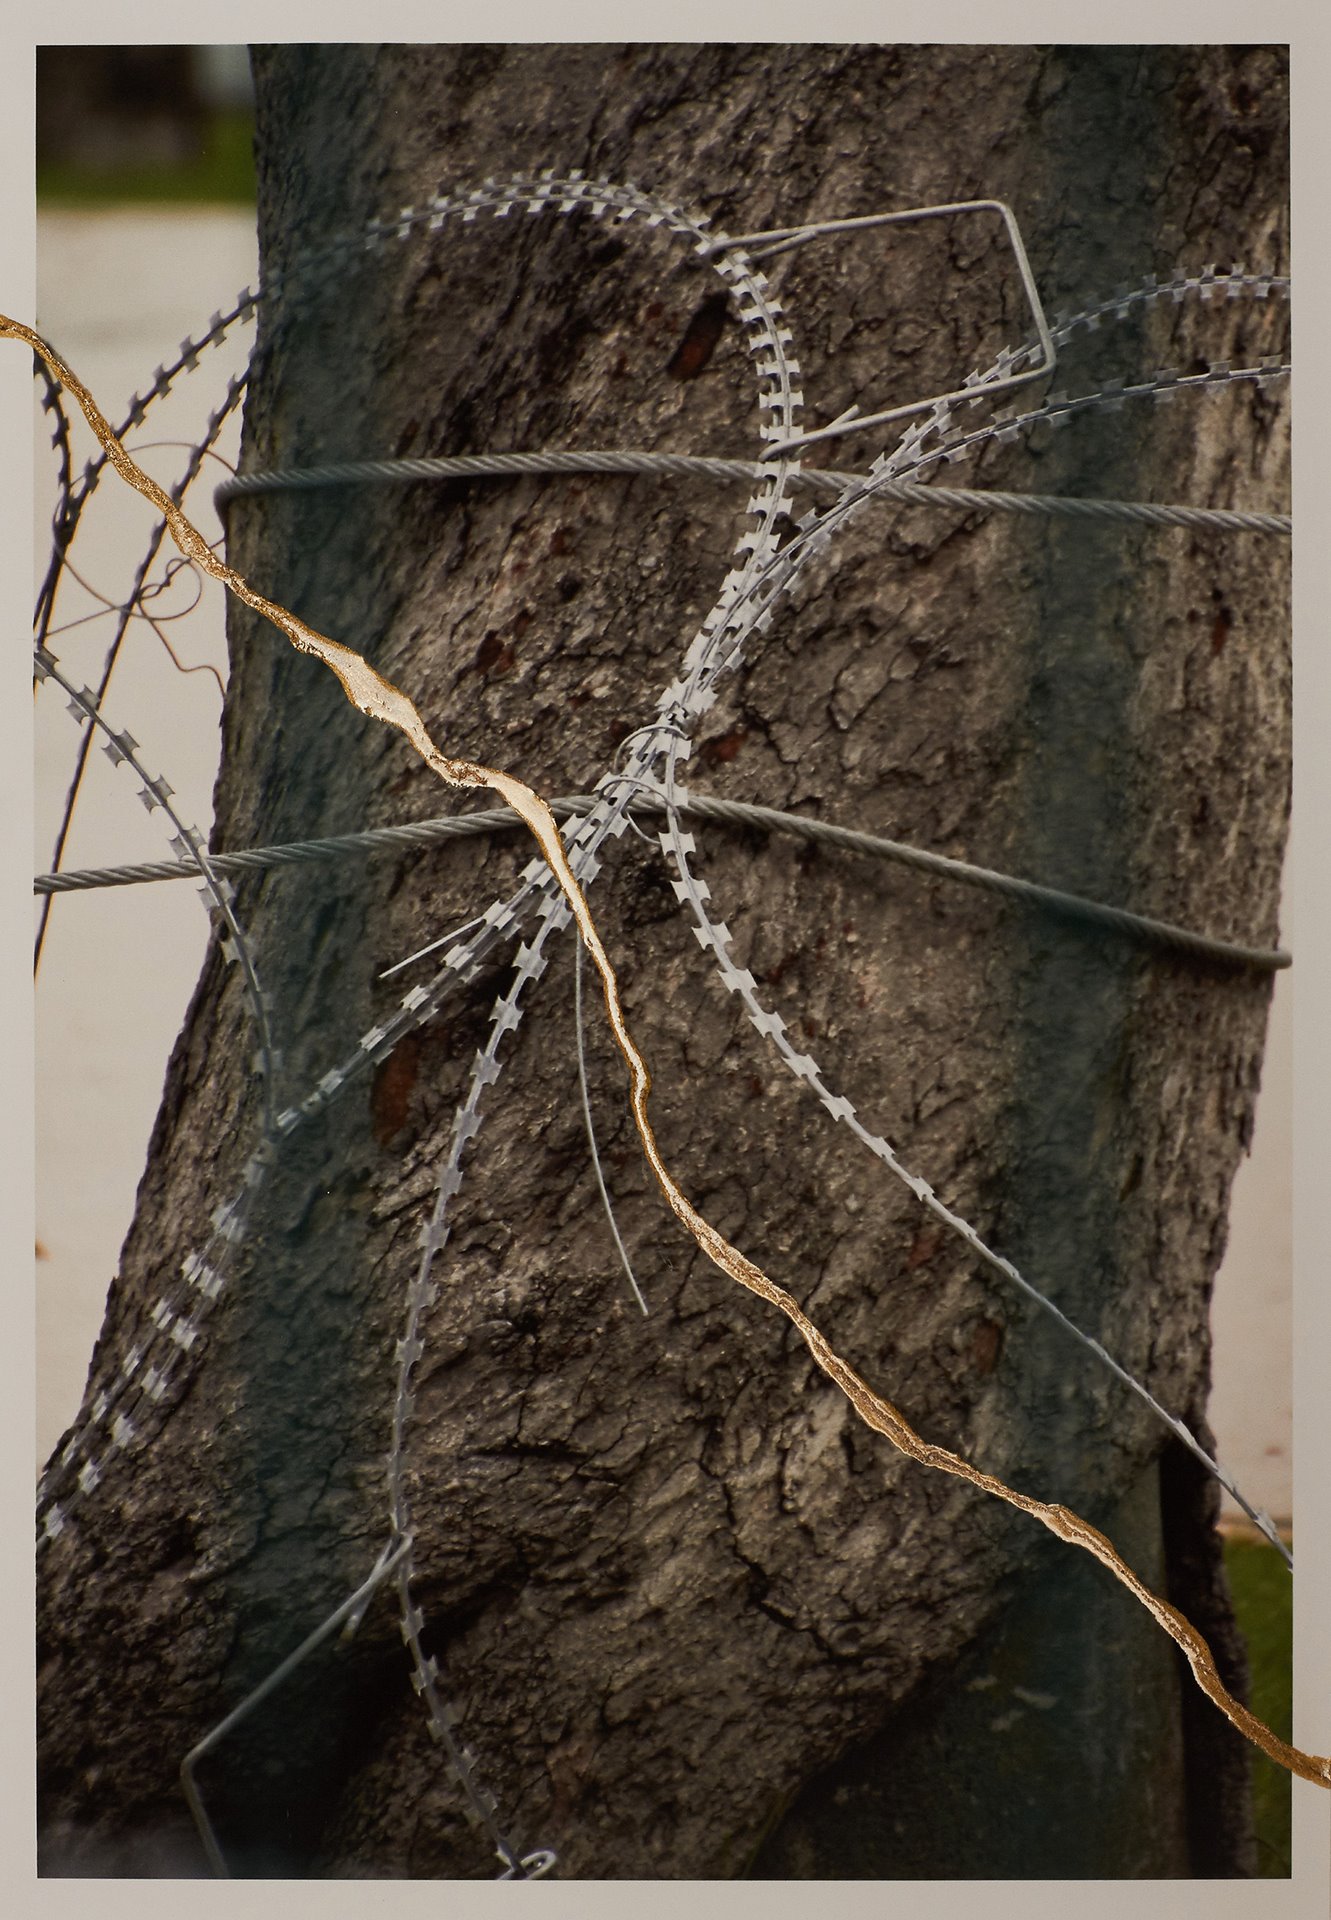 Razor wire on a tree trunk in Sanam Luang, Bangkok, Thailand. This tree is one of three trees that were used to hang the bodies of protesters during the 6 October 1976 massacre.<br />
<br />
On 6 October 2021, survivors, relatives of the deceased and hundreds of youth protesters gathered at Thammasat University for the 45th anniversary of the 6 October 1976 massacre. Containers, railway cars and razor wire were placed around Sanam Luang, the park in front of Thammasat University, where students were lynched and hanged by the military and royalist civilians.